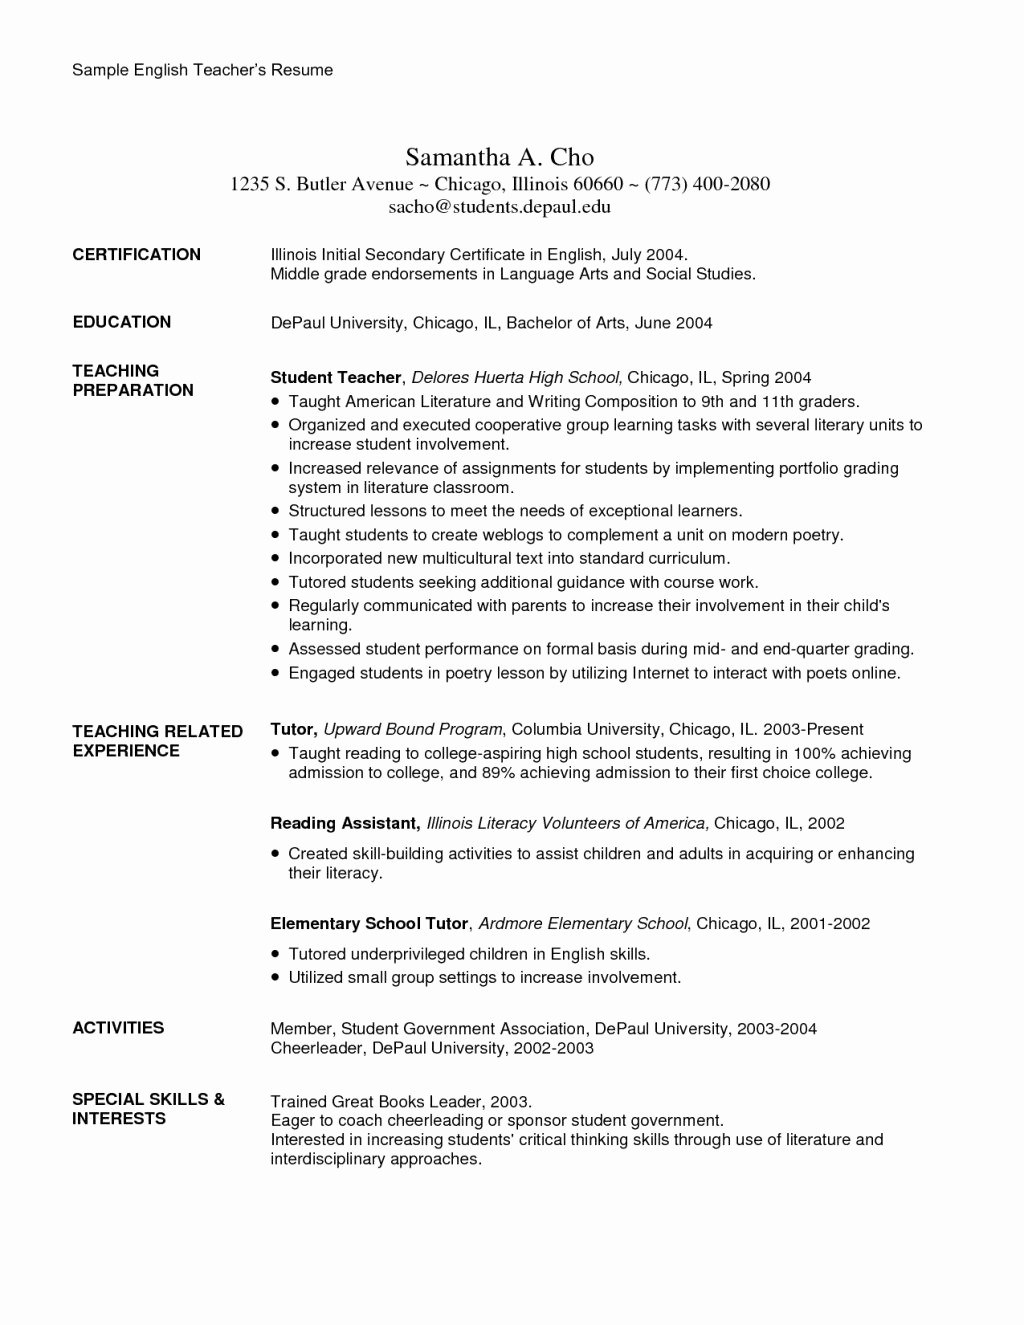 Free Resume Templates In English Lovely Resume and Template 60 Awesome English Resume Template